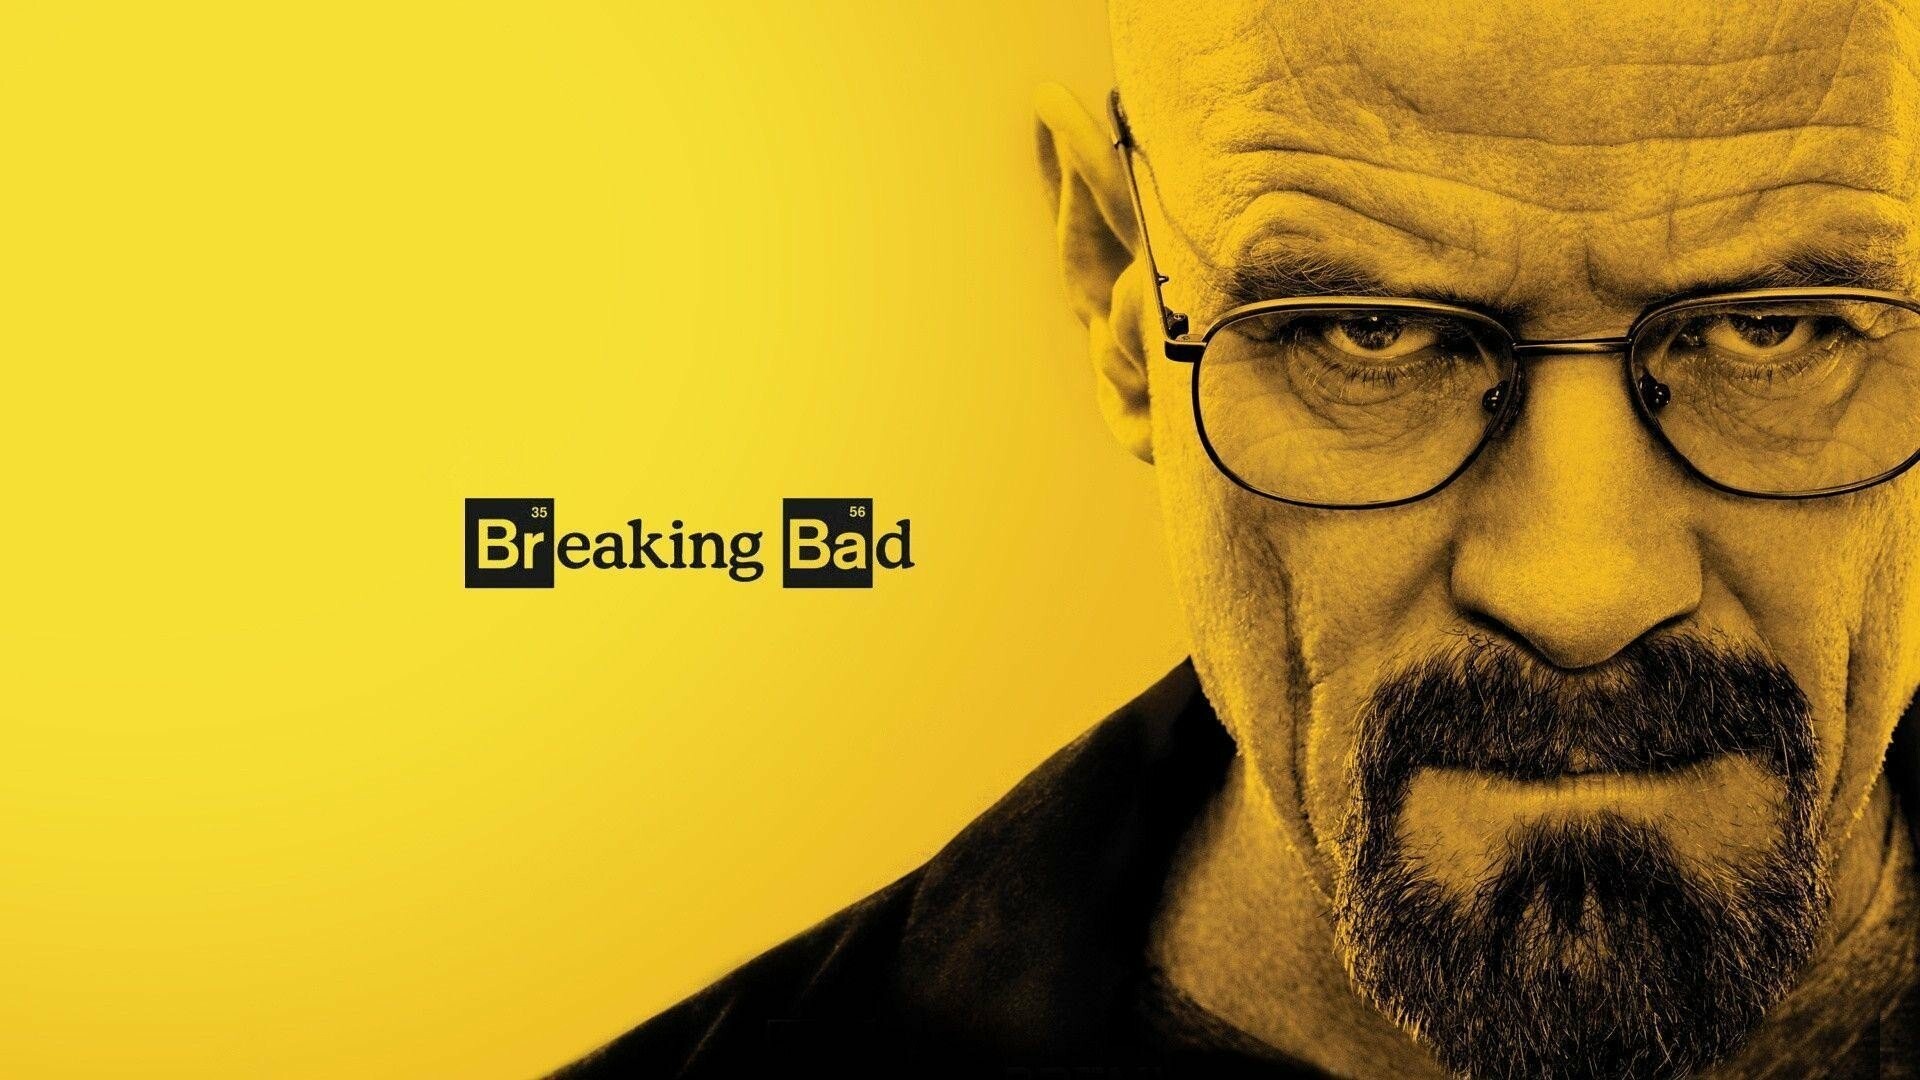 Breaking Bad: Bryan Cranston, The 2014 Golden Globe Award for Best Actor In A Television Series. 1920x1080 Full HD Wallpaper.